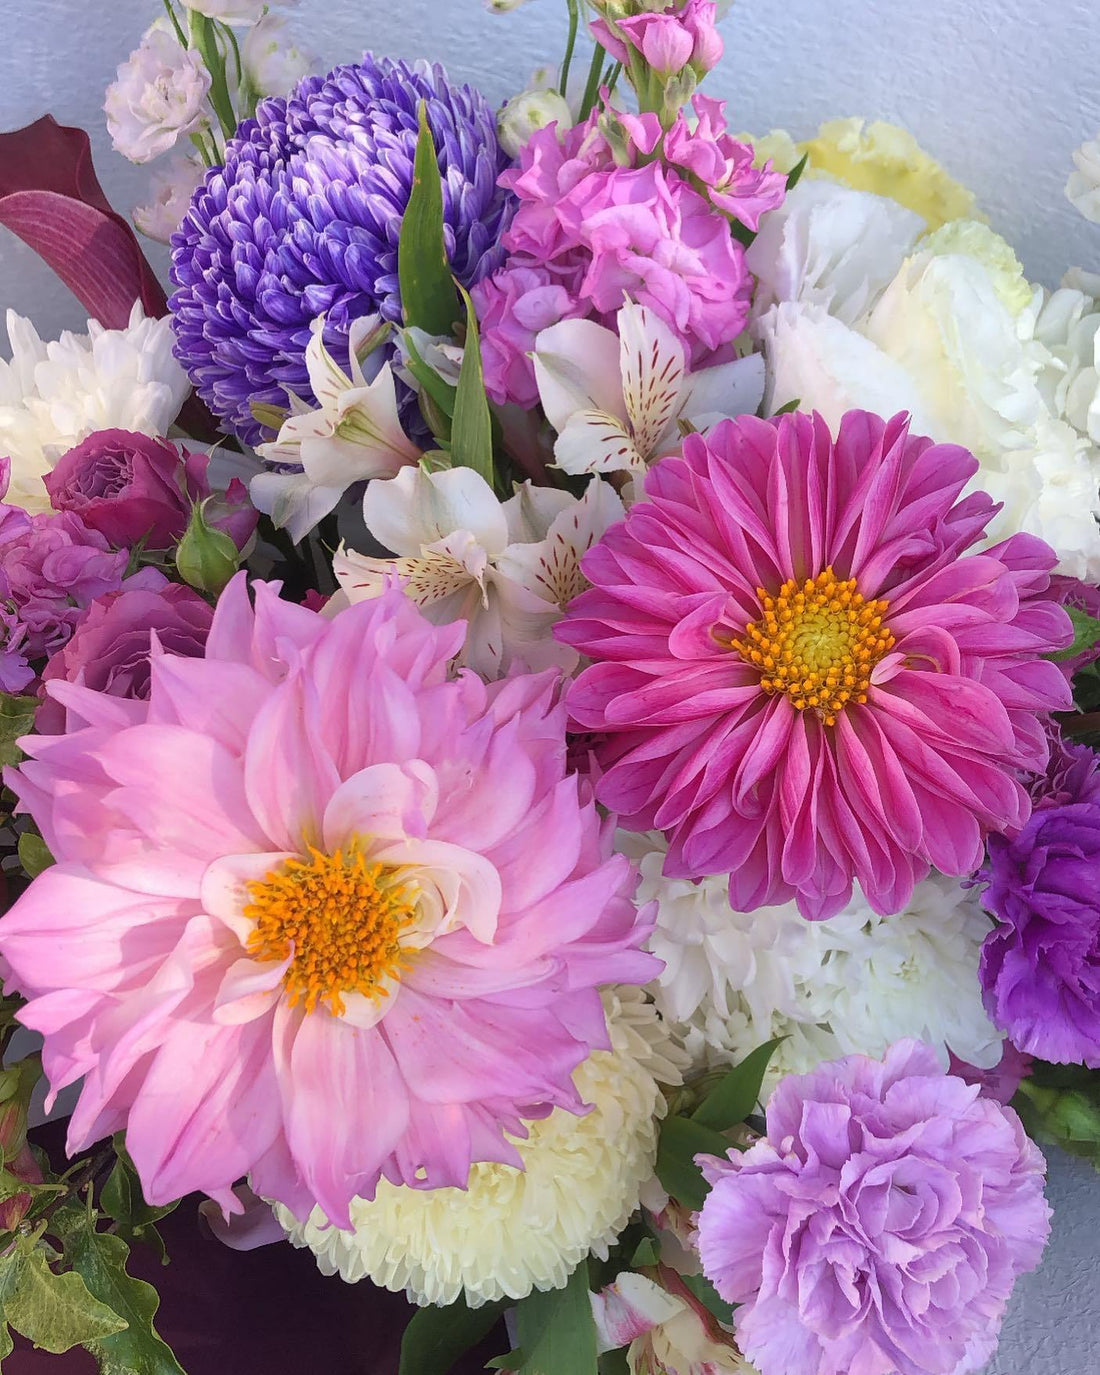 Mother's Day is coming up... - Flowers Gold Coast